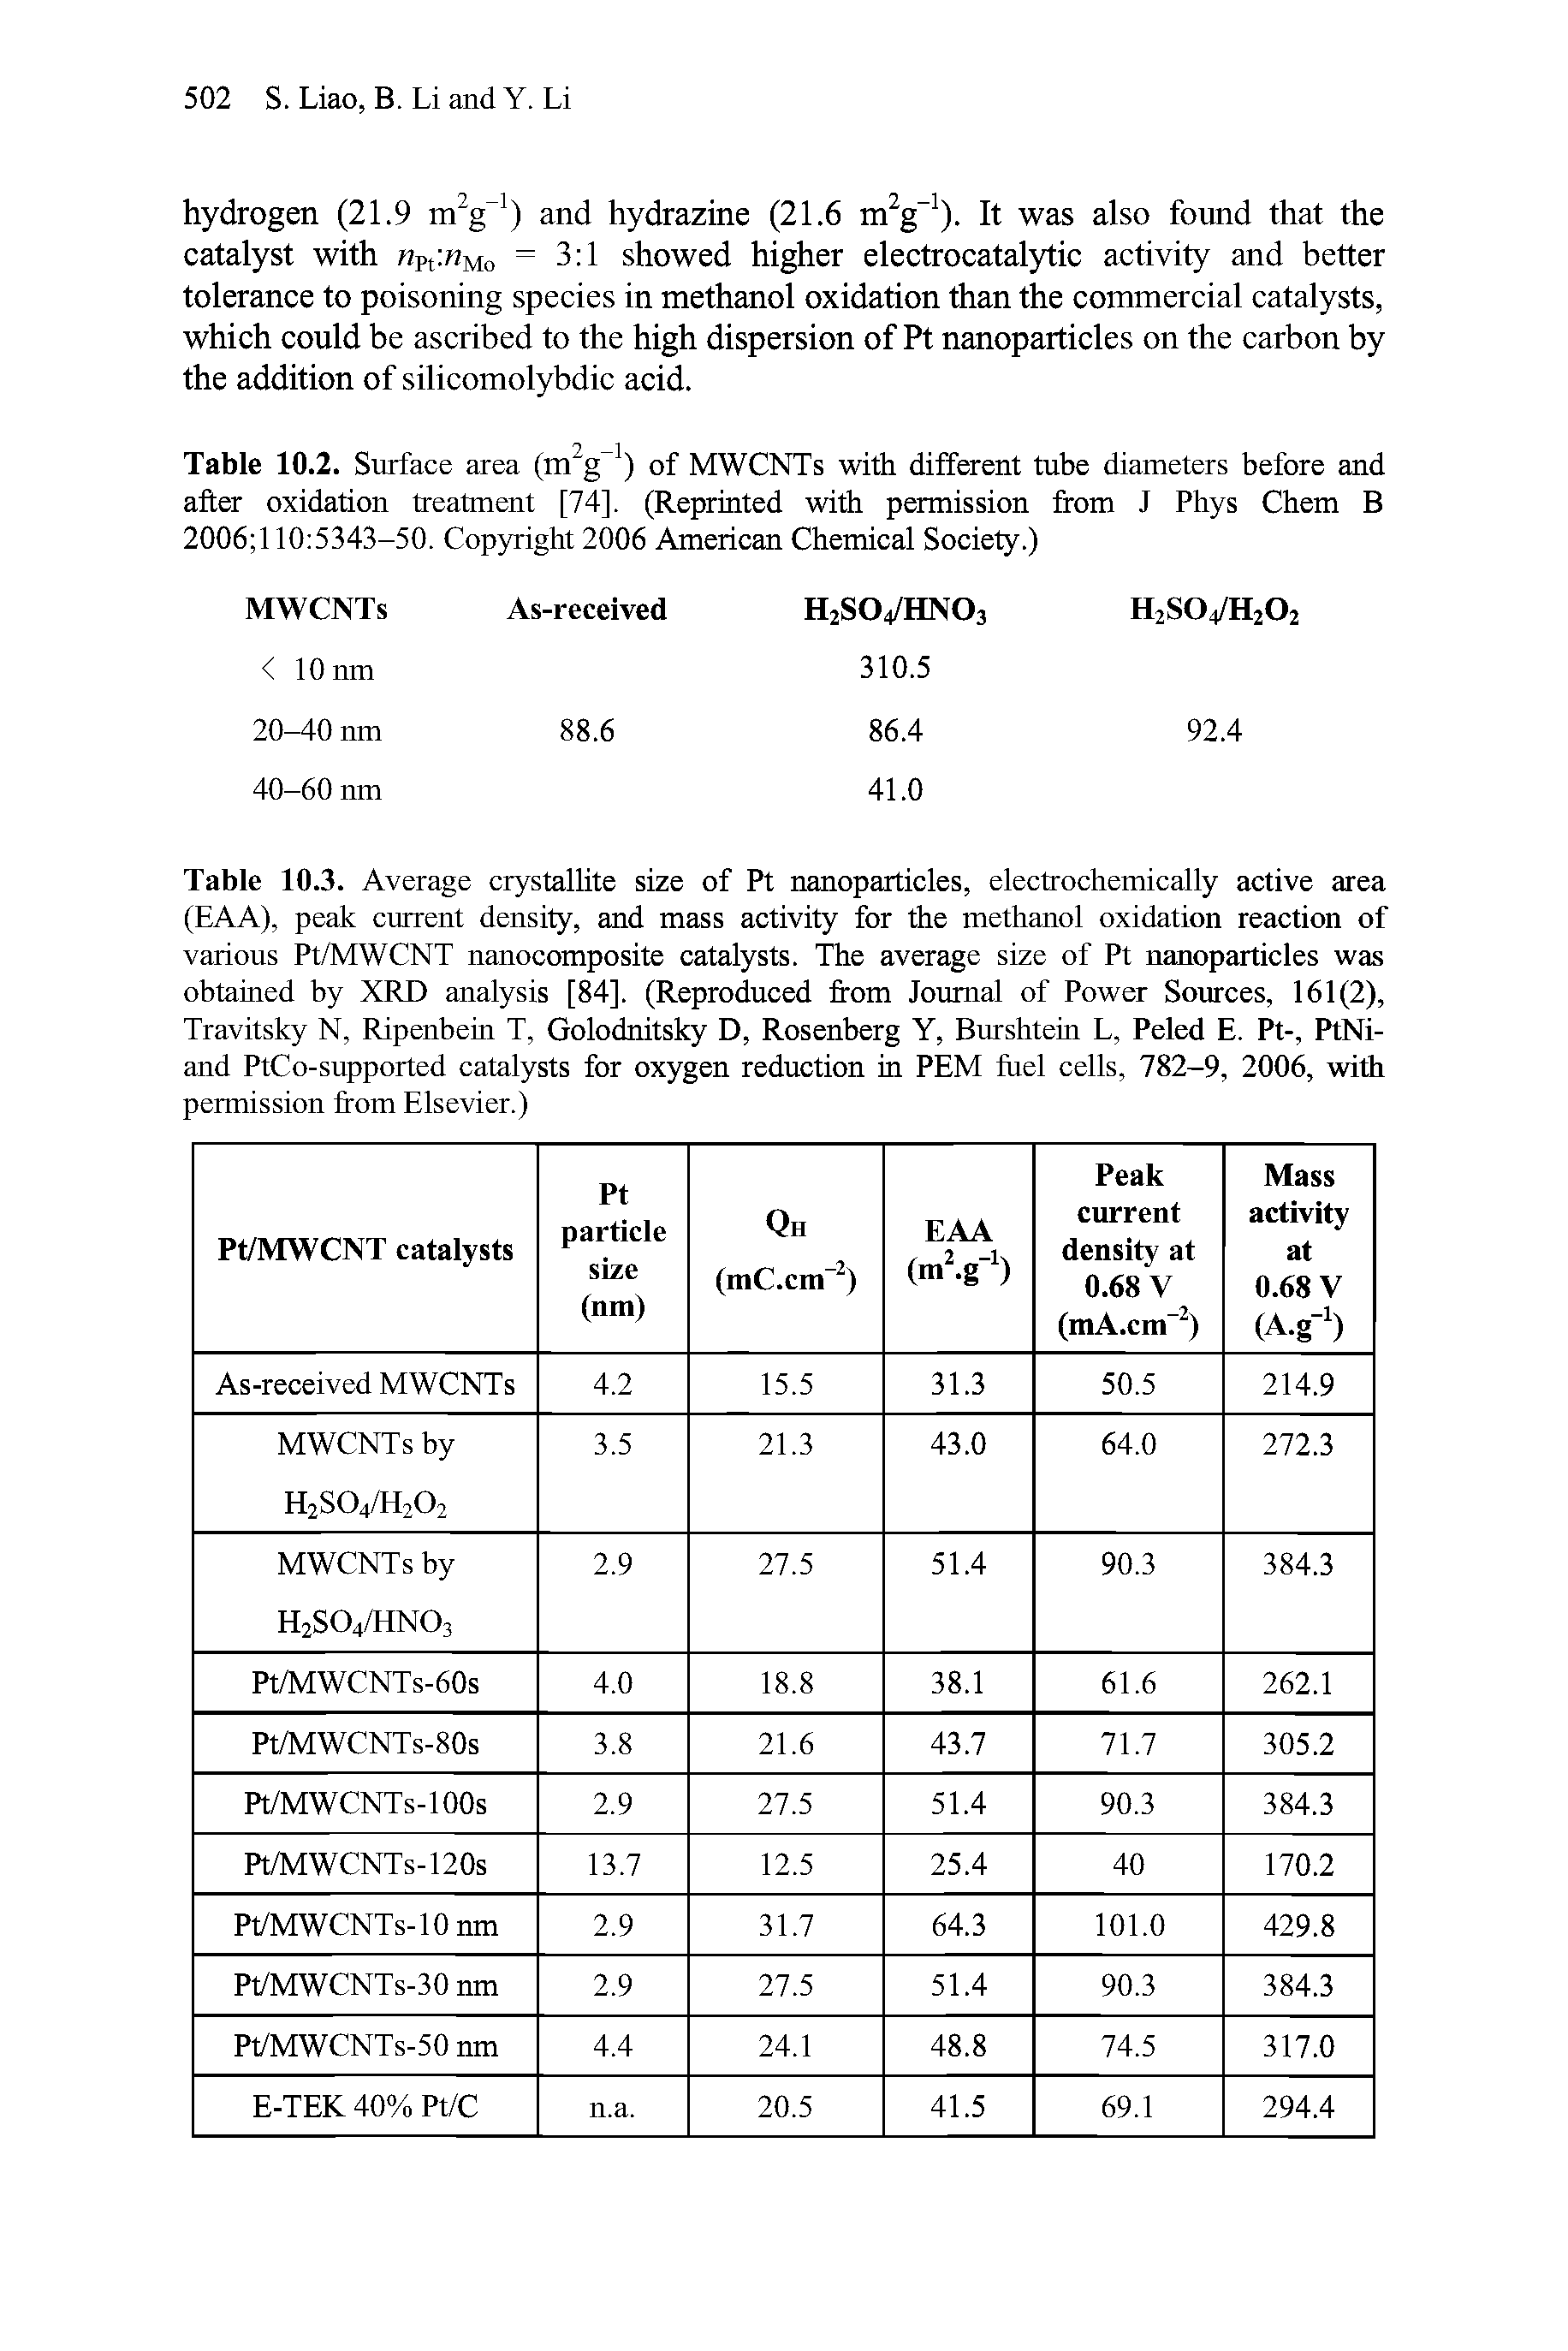 Table 10.3. Average crystallite size of Pt nanoparticles, electrochemically active area (EAA), peak current density, and mass activity for the methanol oxidation reaction of various Pt/MWCNT nanocomposite catalysts. The average size of Pt nanoparticles was obtained by XRD analysis [84]. (Reproduced from Journal of Power Sources, 161(2), Travitsky N, Ripenbein T, Golodnitsky D, Rosenberg Y, Burshtein L, Peled E. Pt-, PtNi-and PtCo-supported catalysts for oxygen reduction in PEM fuel cells, 782-9, 2006, with permission from Elsevier.)...